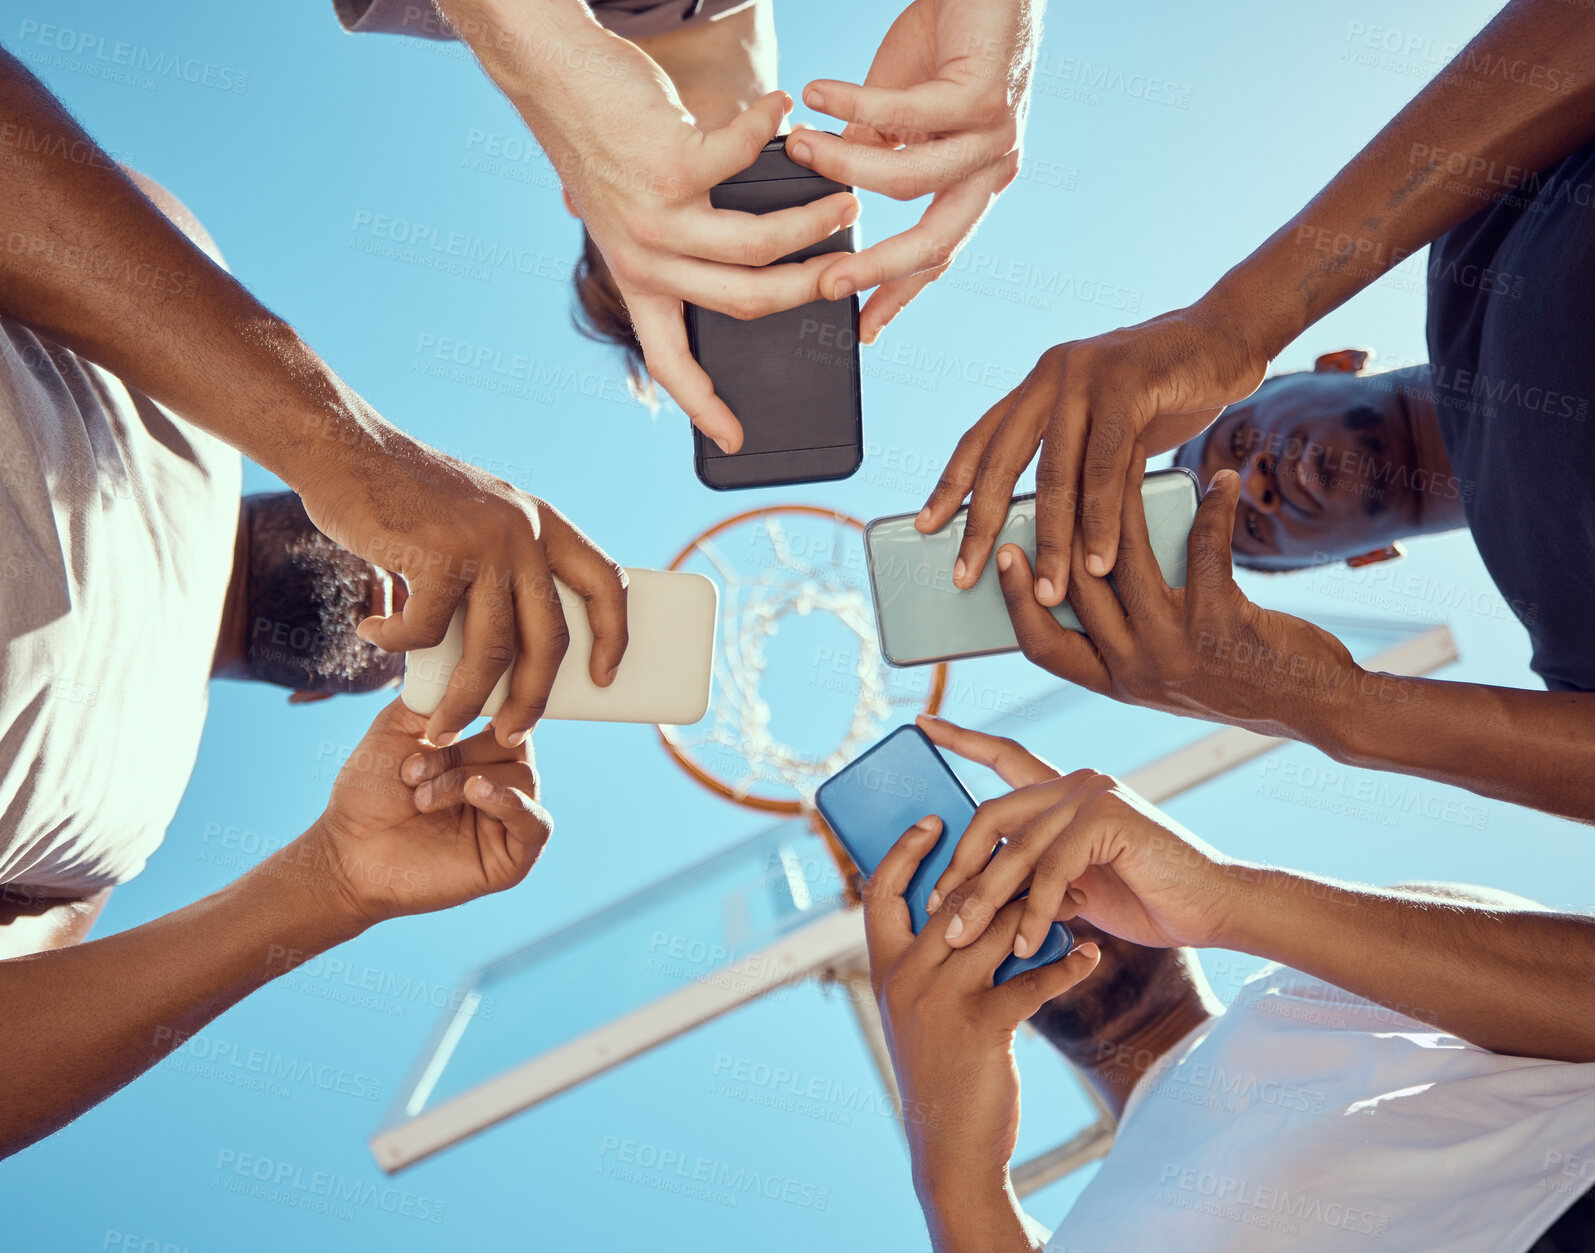 Buy stock photo Basketball team in a circle with phone networking on social media while standing on a court. Sports group doing research on game strategy, collaboration and skill together with technology.